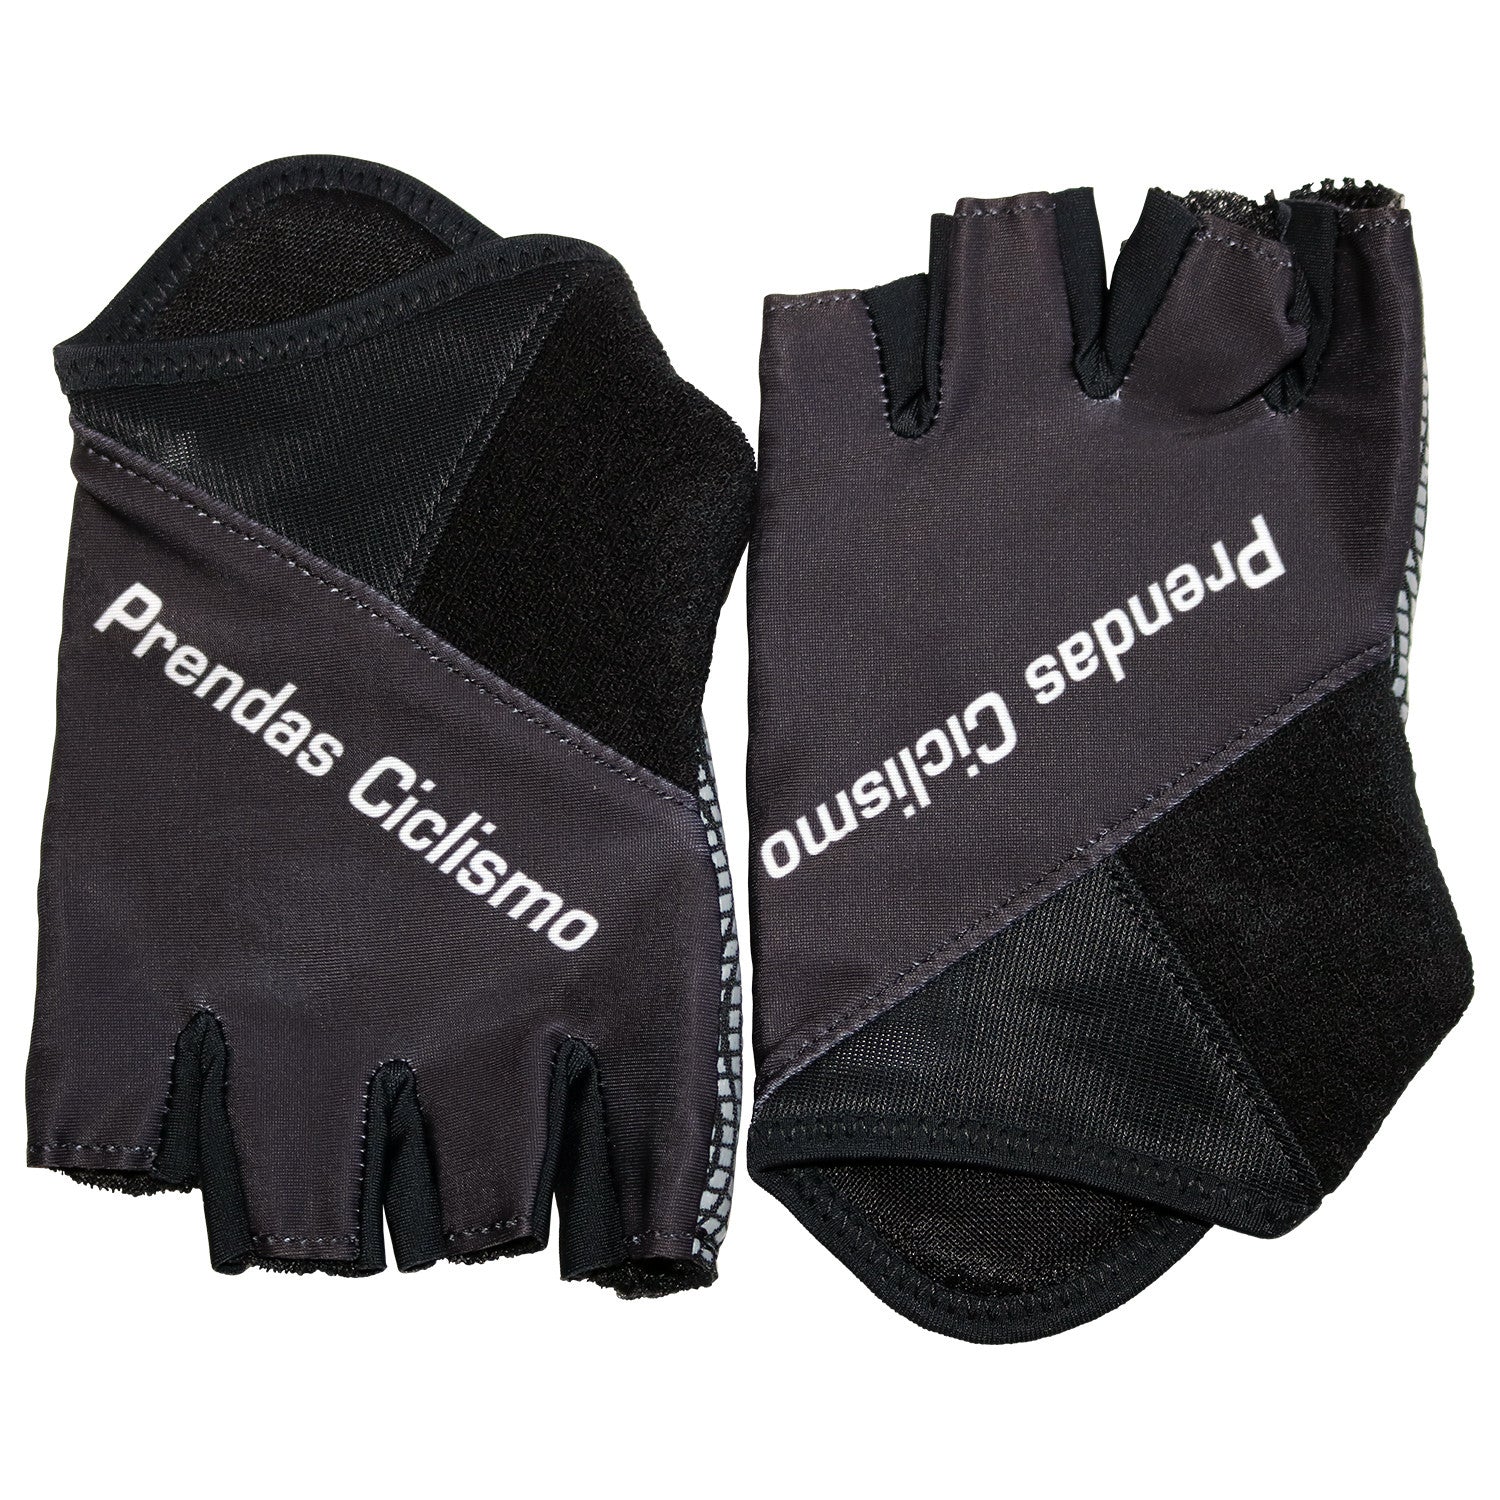 track mitts cycling